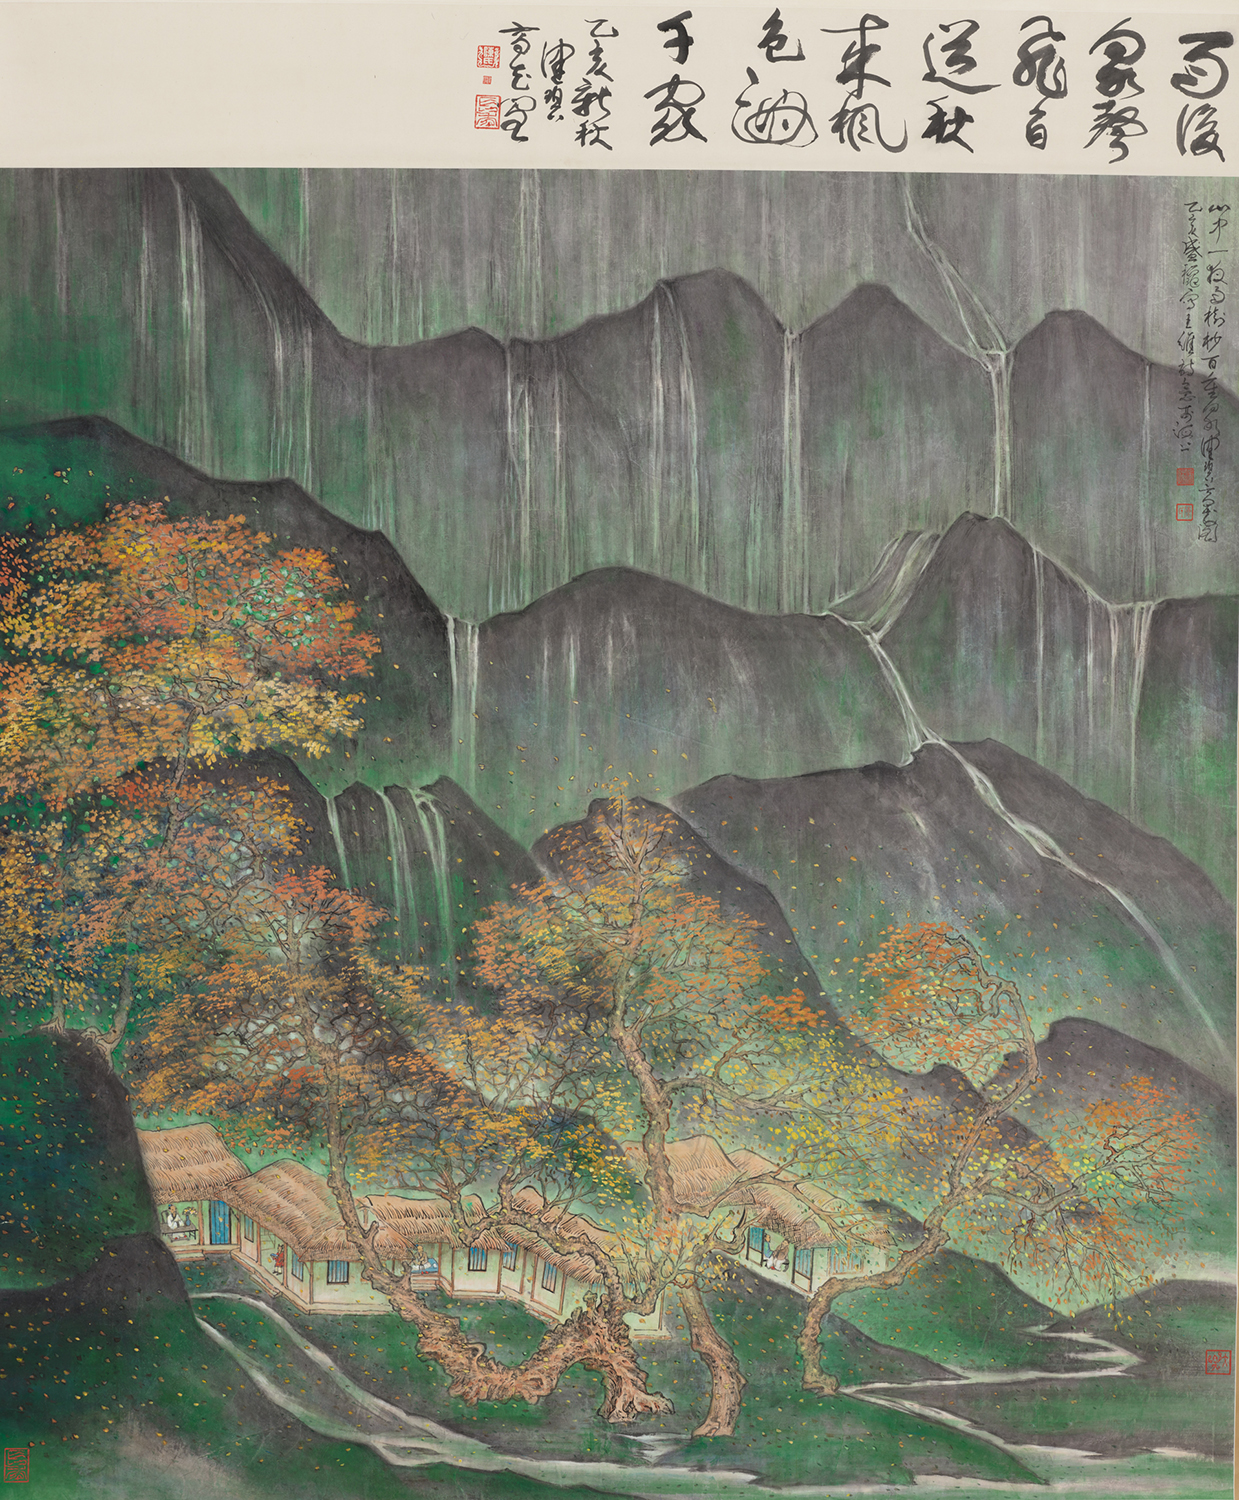 Chen Peiqiu (1923 & 2020) Landscape inspired by the poem of Wang Wei